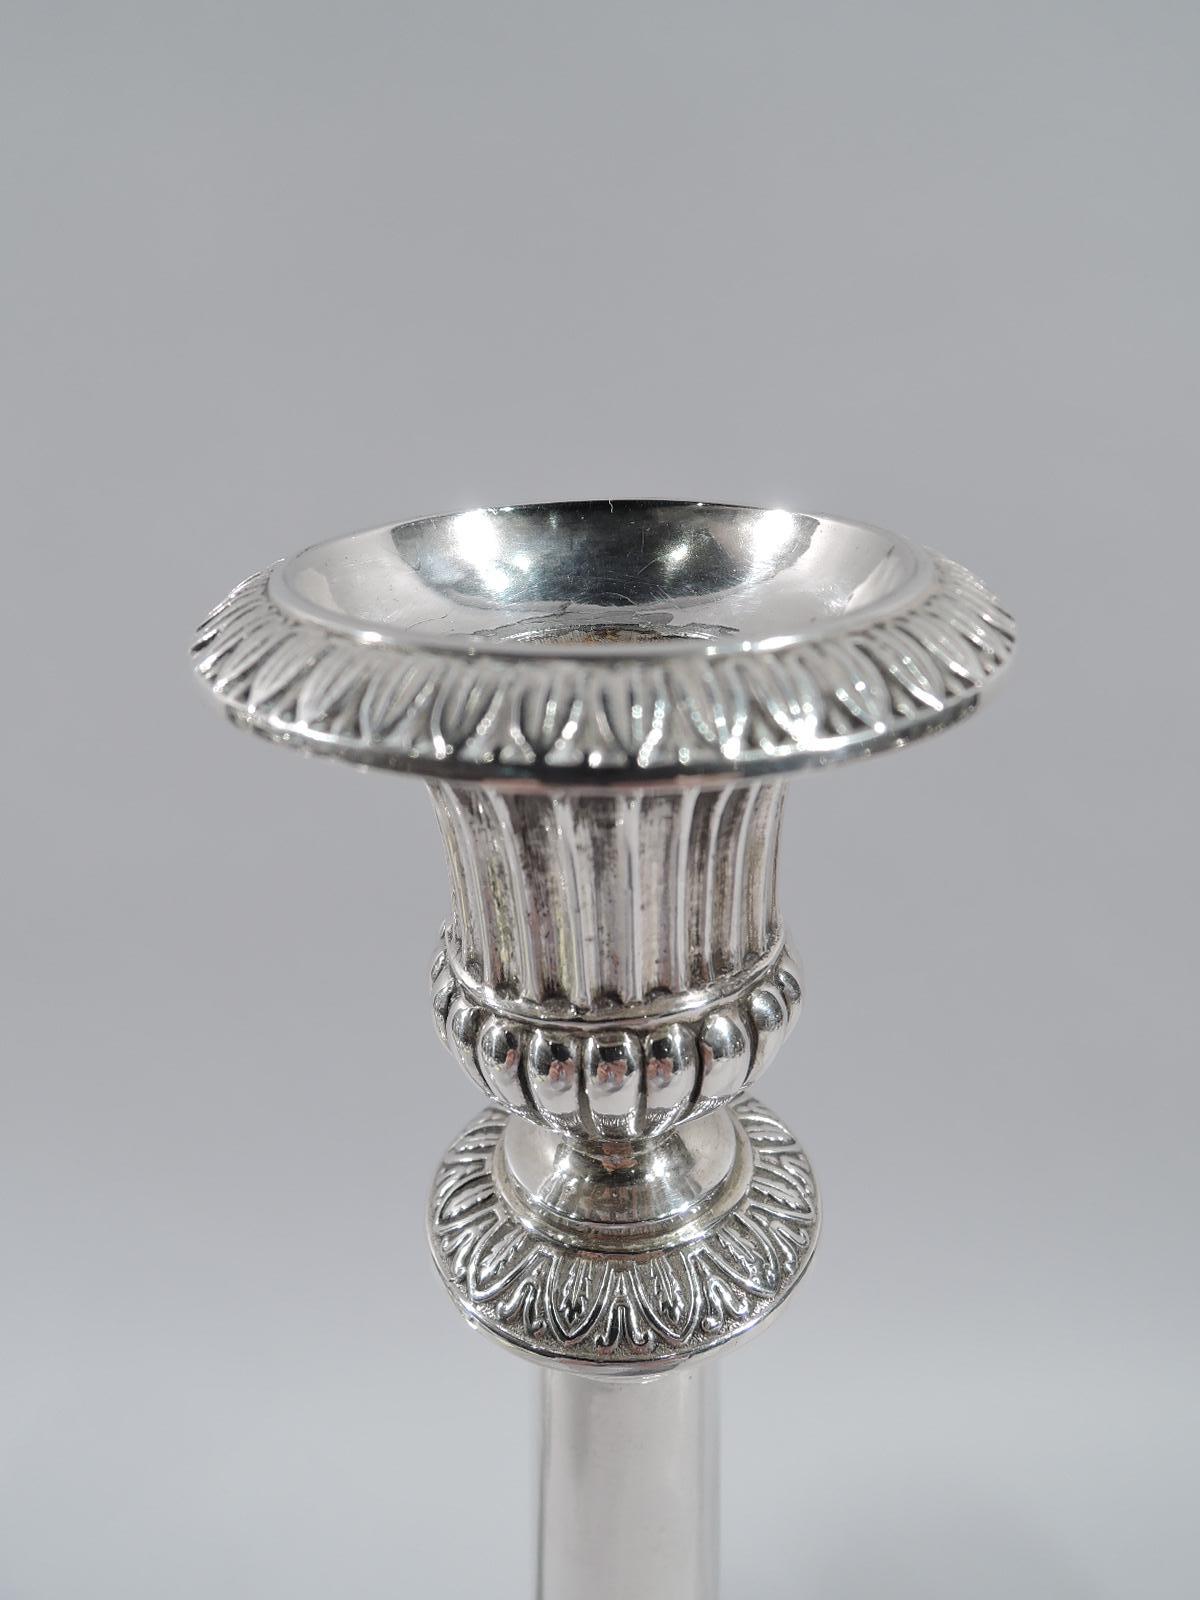 Pair of German Neoclassical silver candlesticks, early 19th century. Each: Upward tapering shaft on cylindrical plinth on stepped base. Bellied urn socket is fluted and lobed. Detachable bobech has leaf-and-dart ornament as do flange and foot rim.